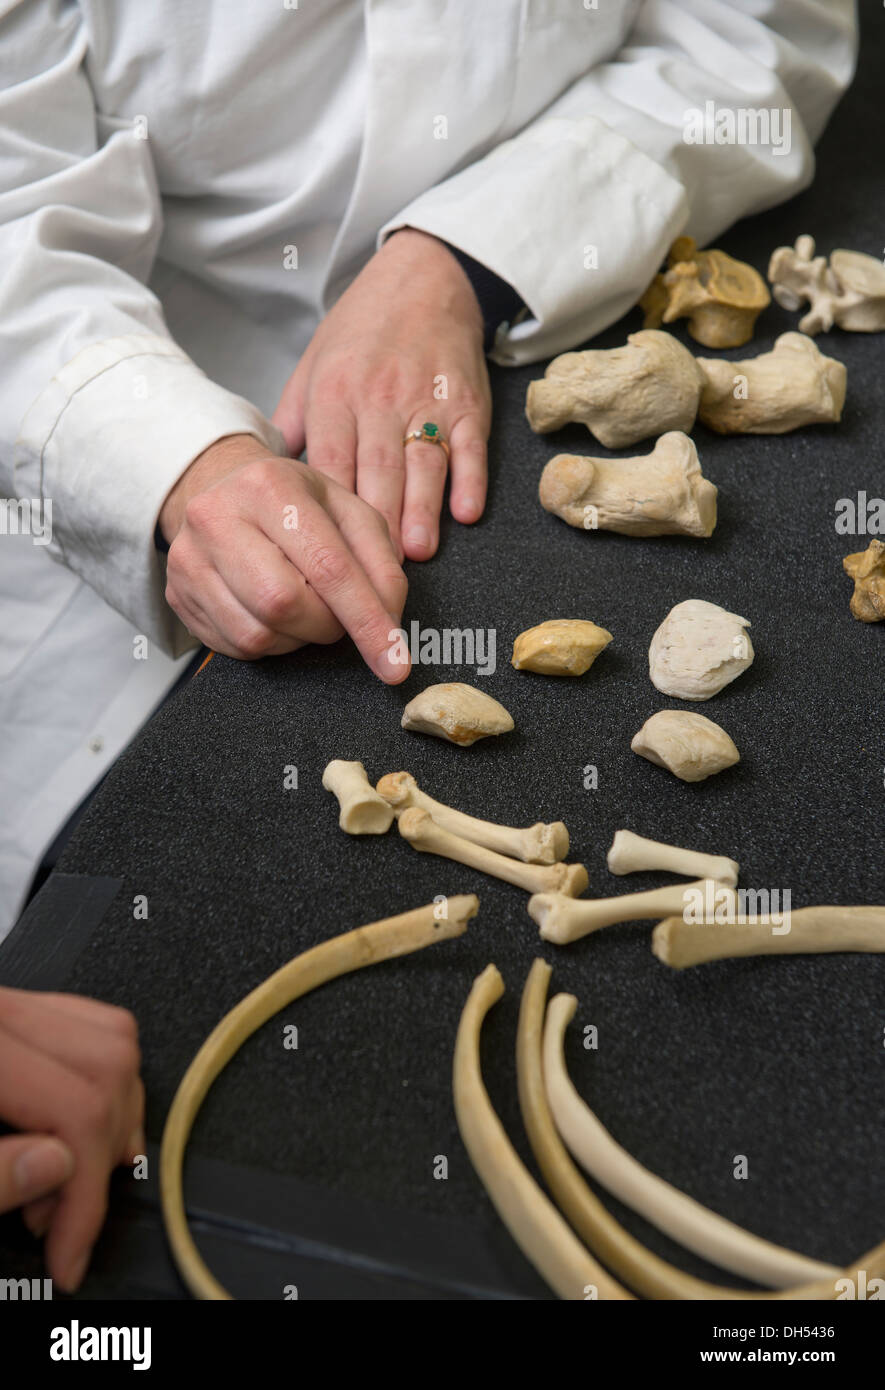 Students learn about bone identification including ruling out animal bones as possible human remains with Forensic Anthropologis Stock Photo